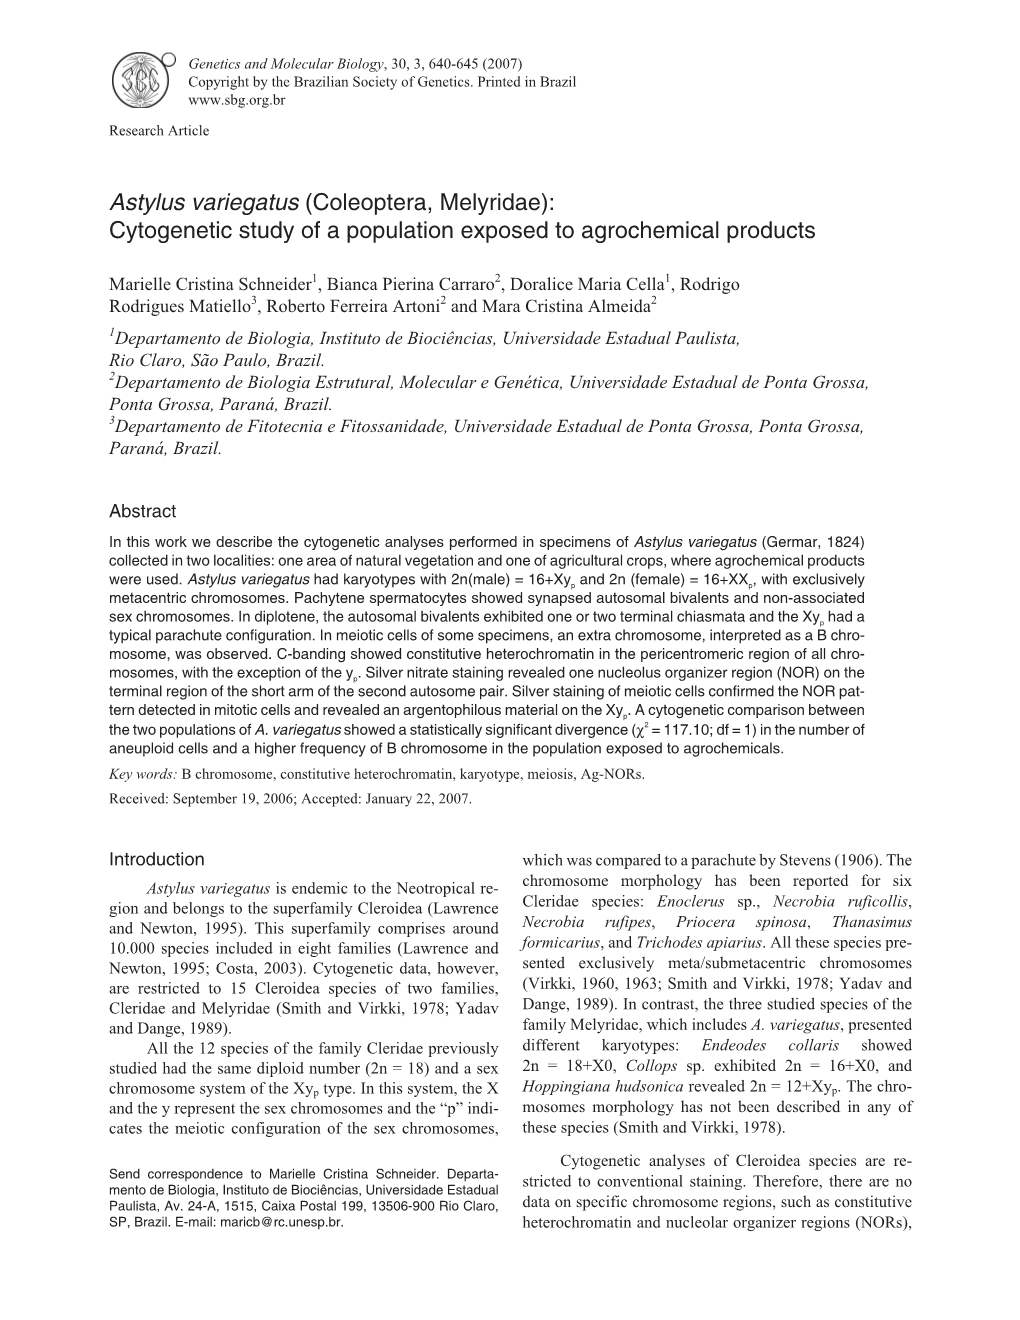 Astylus Variegatus (Coleoptera, Melyridae): Cytogenetic Study of a Population Exposed to Agrochemical Products